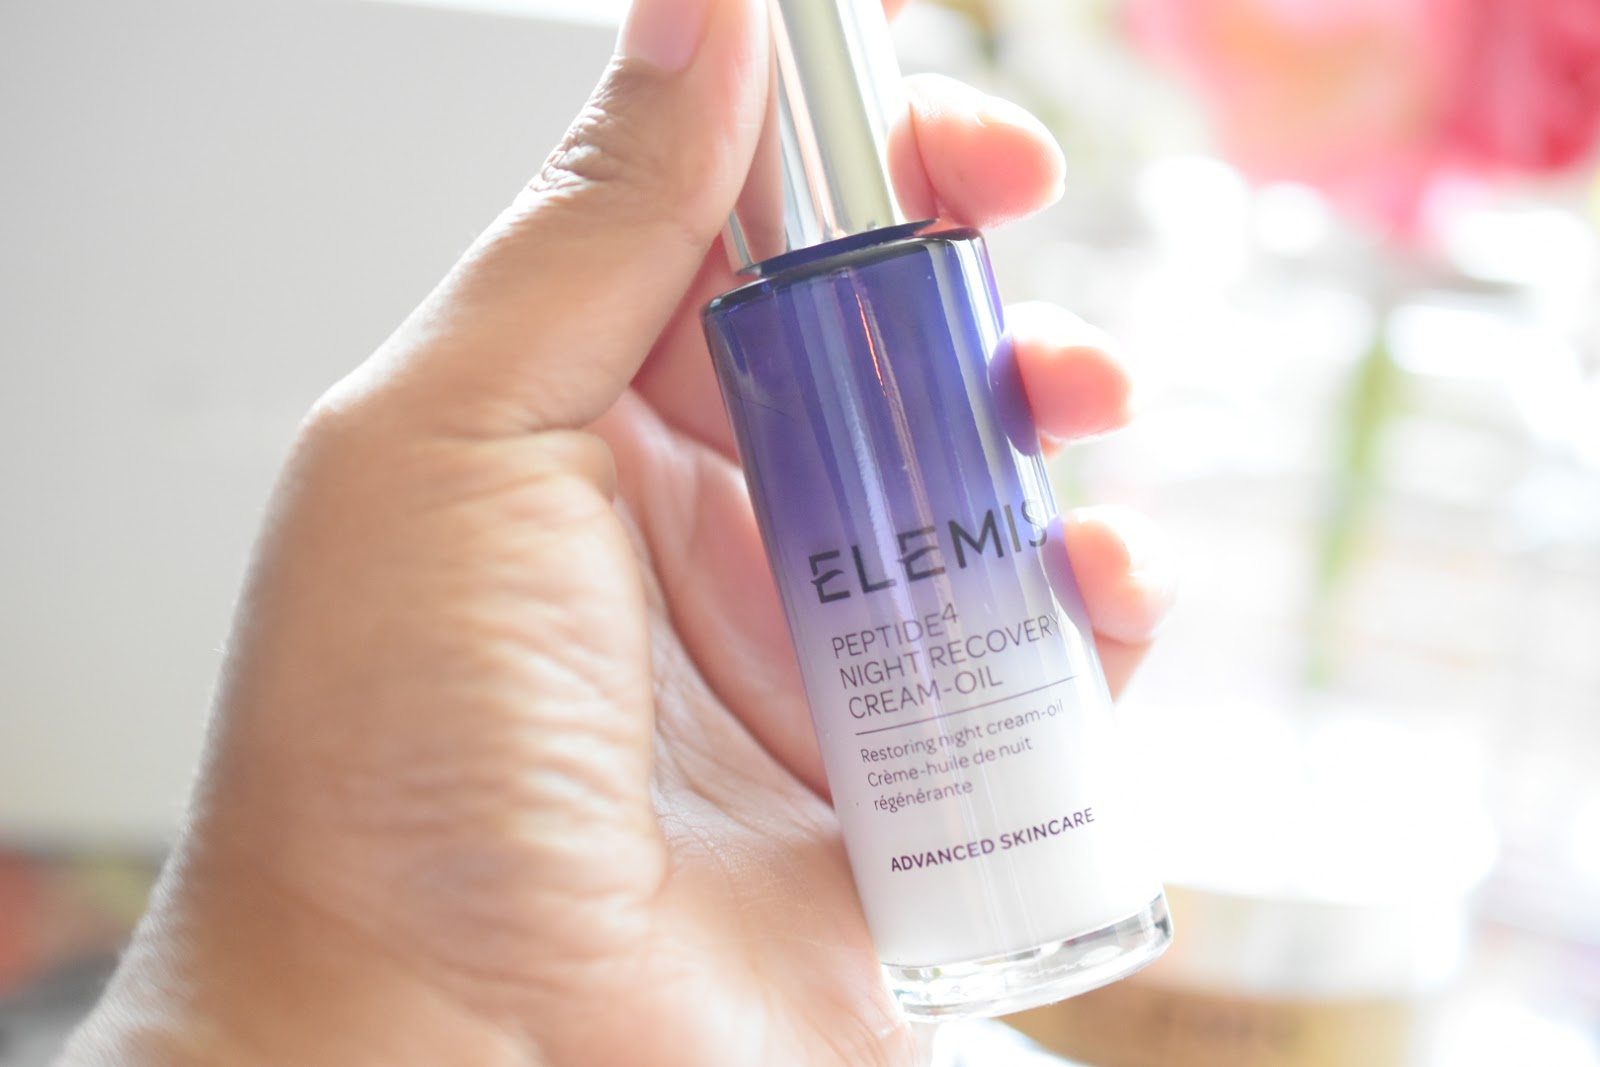 Does Anti-Aging Skincare Products Actually Work?  ELEMIS Review  via  www.productreviewmom.com